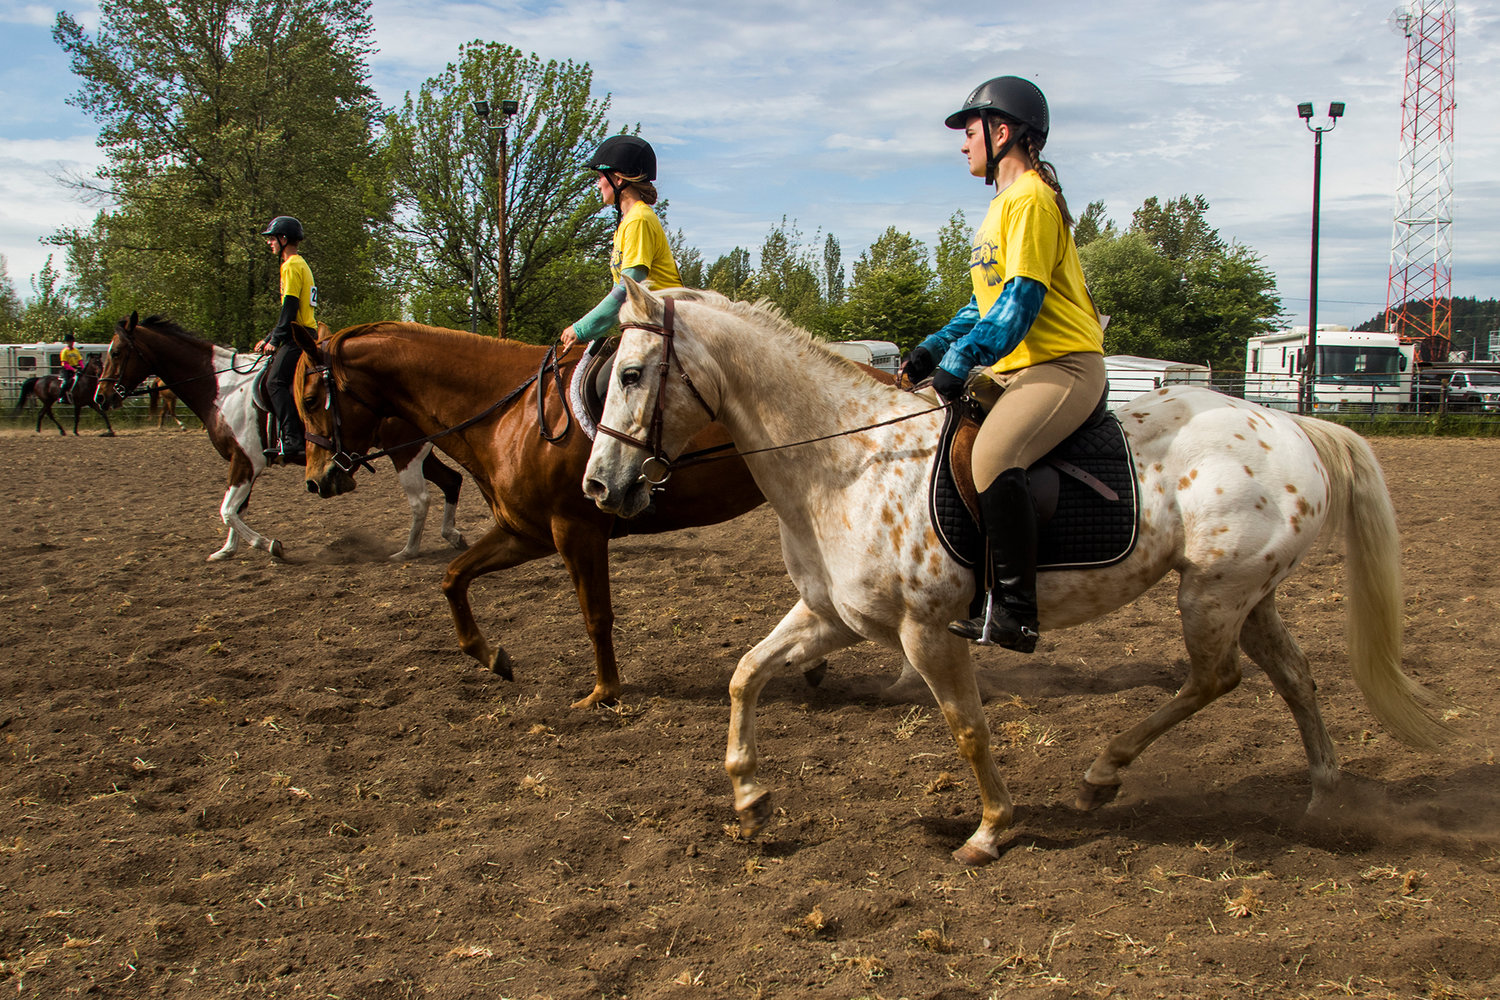 Riders are seen on horseback during the Spring Youth Fair in 2018.